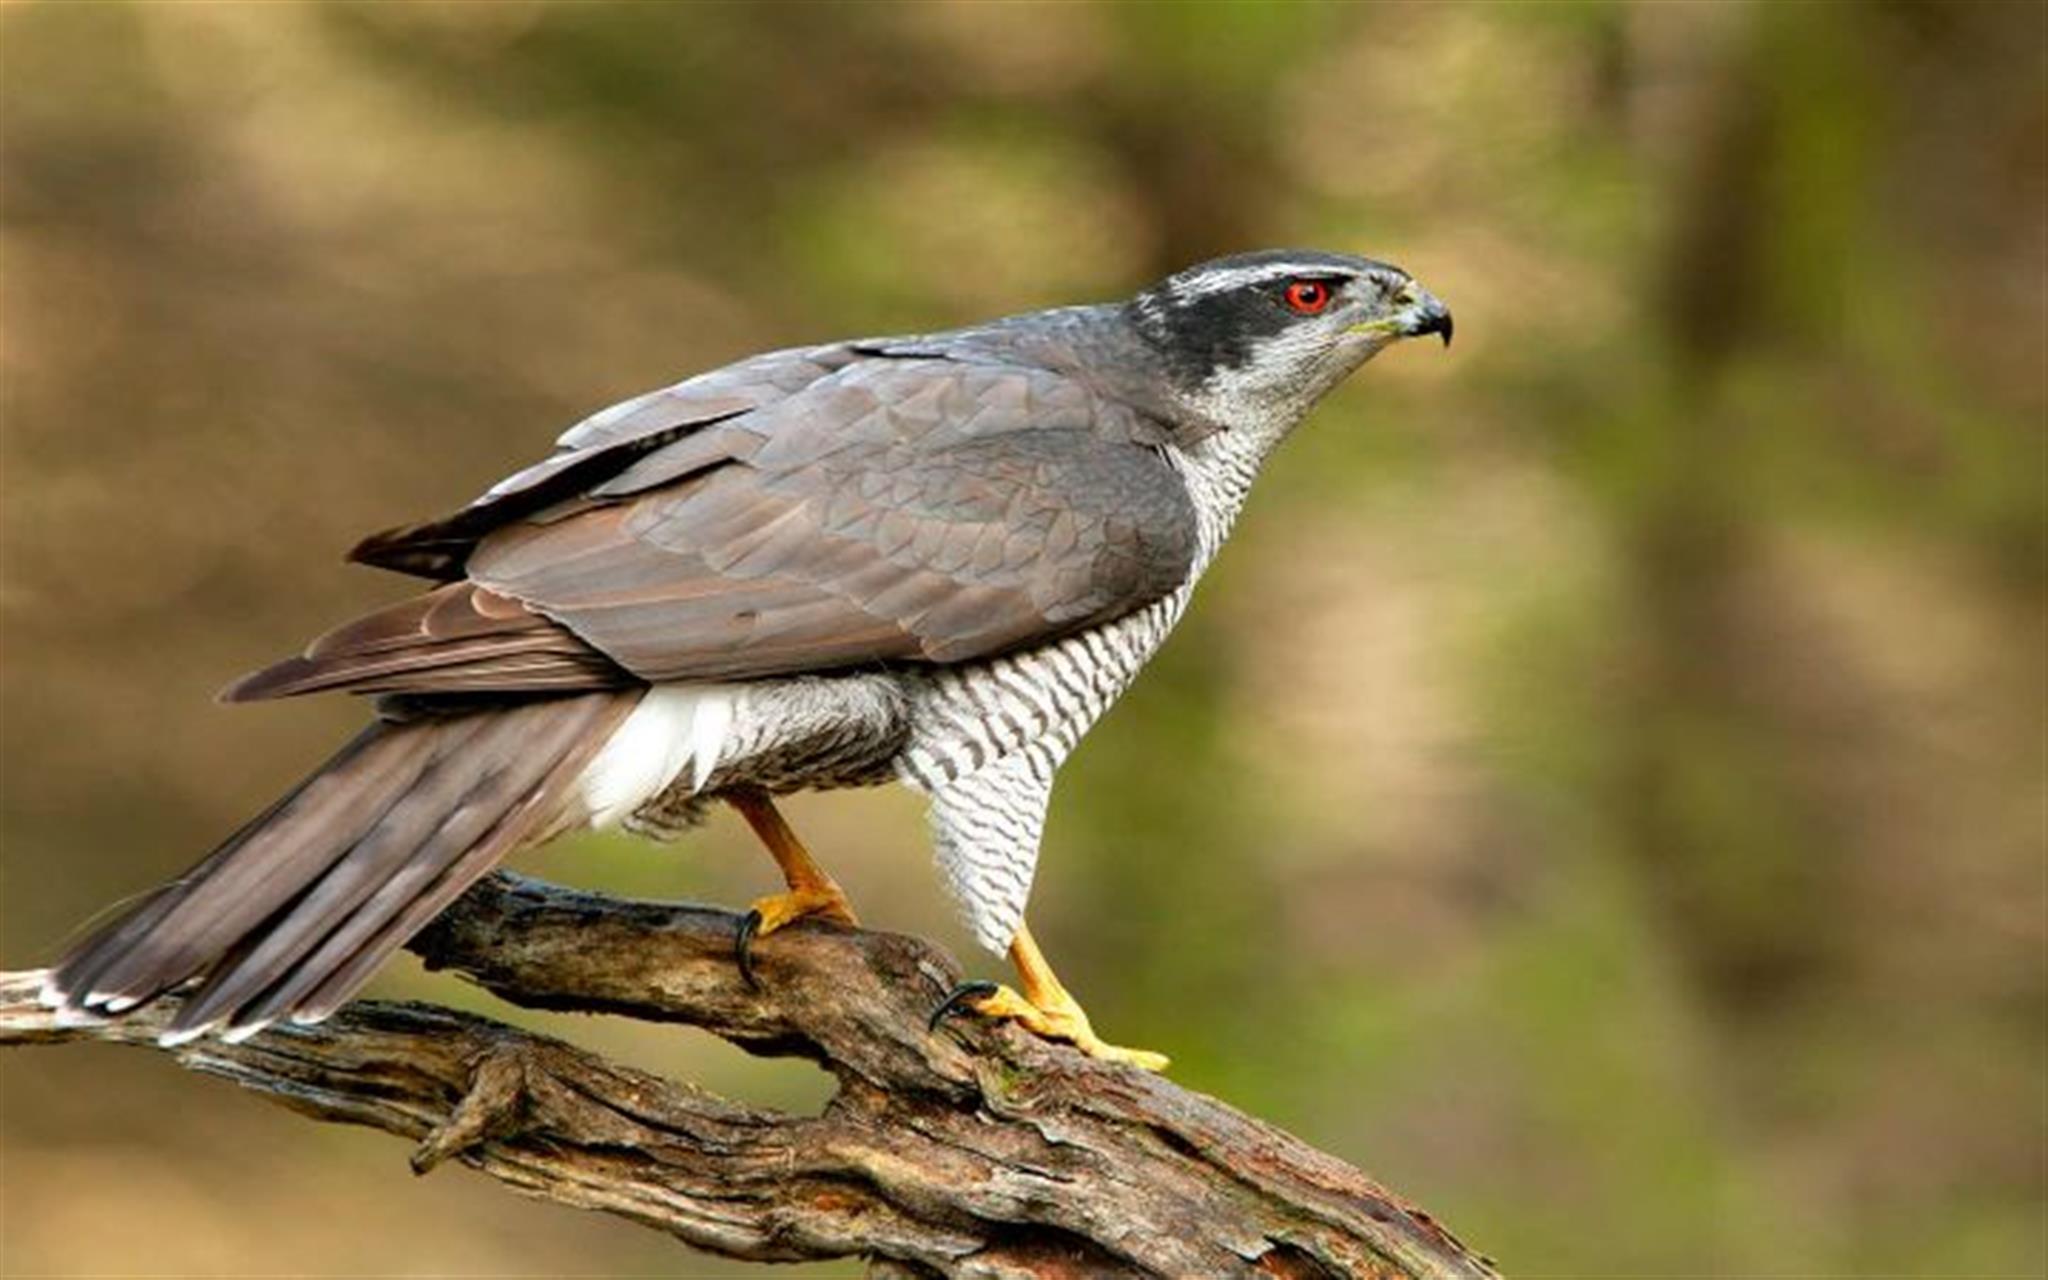 Looking for the Goshawk image